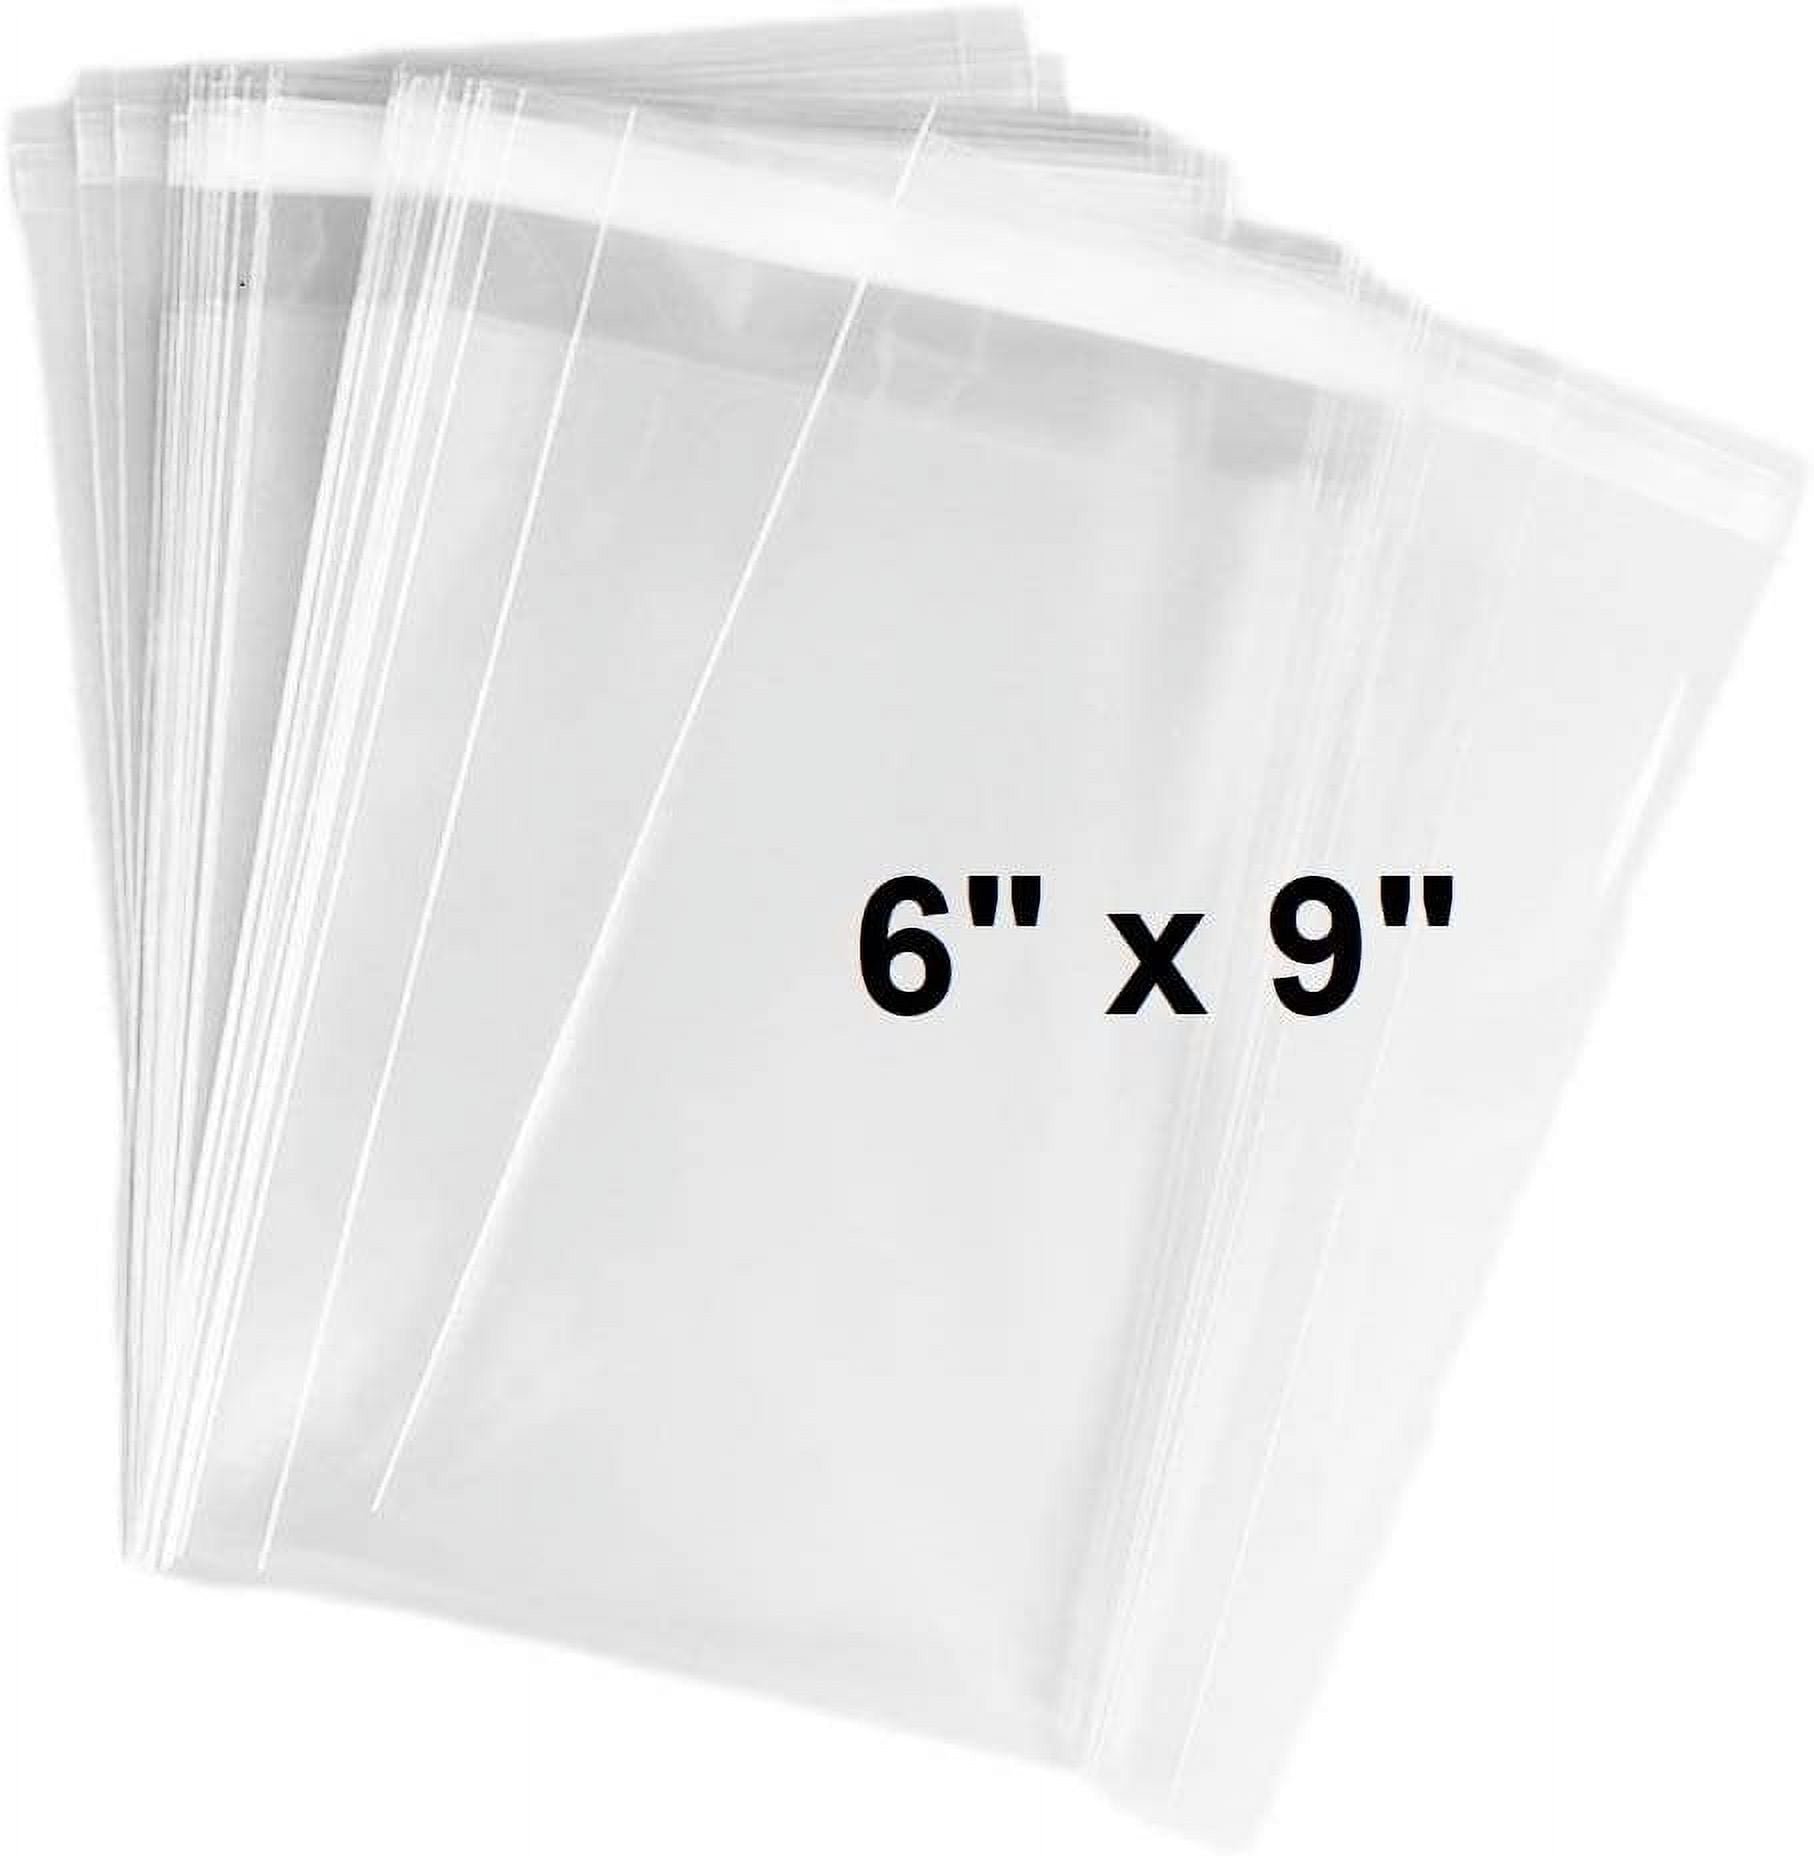 200 Pcs 3x7 Clear Resealable Cello / Cellophane Bags Self Adhesive  Sealing OPP Treat Bags for Bakery Candle Candy Cookie Prints Card Pretzels